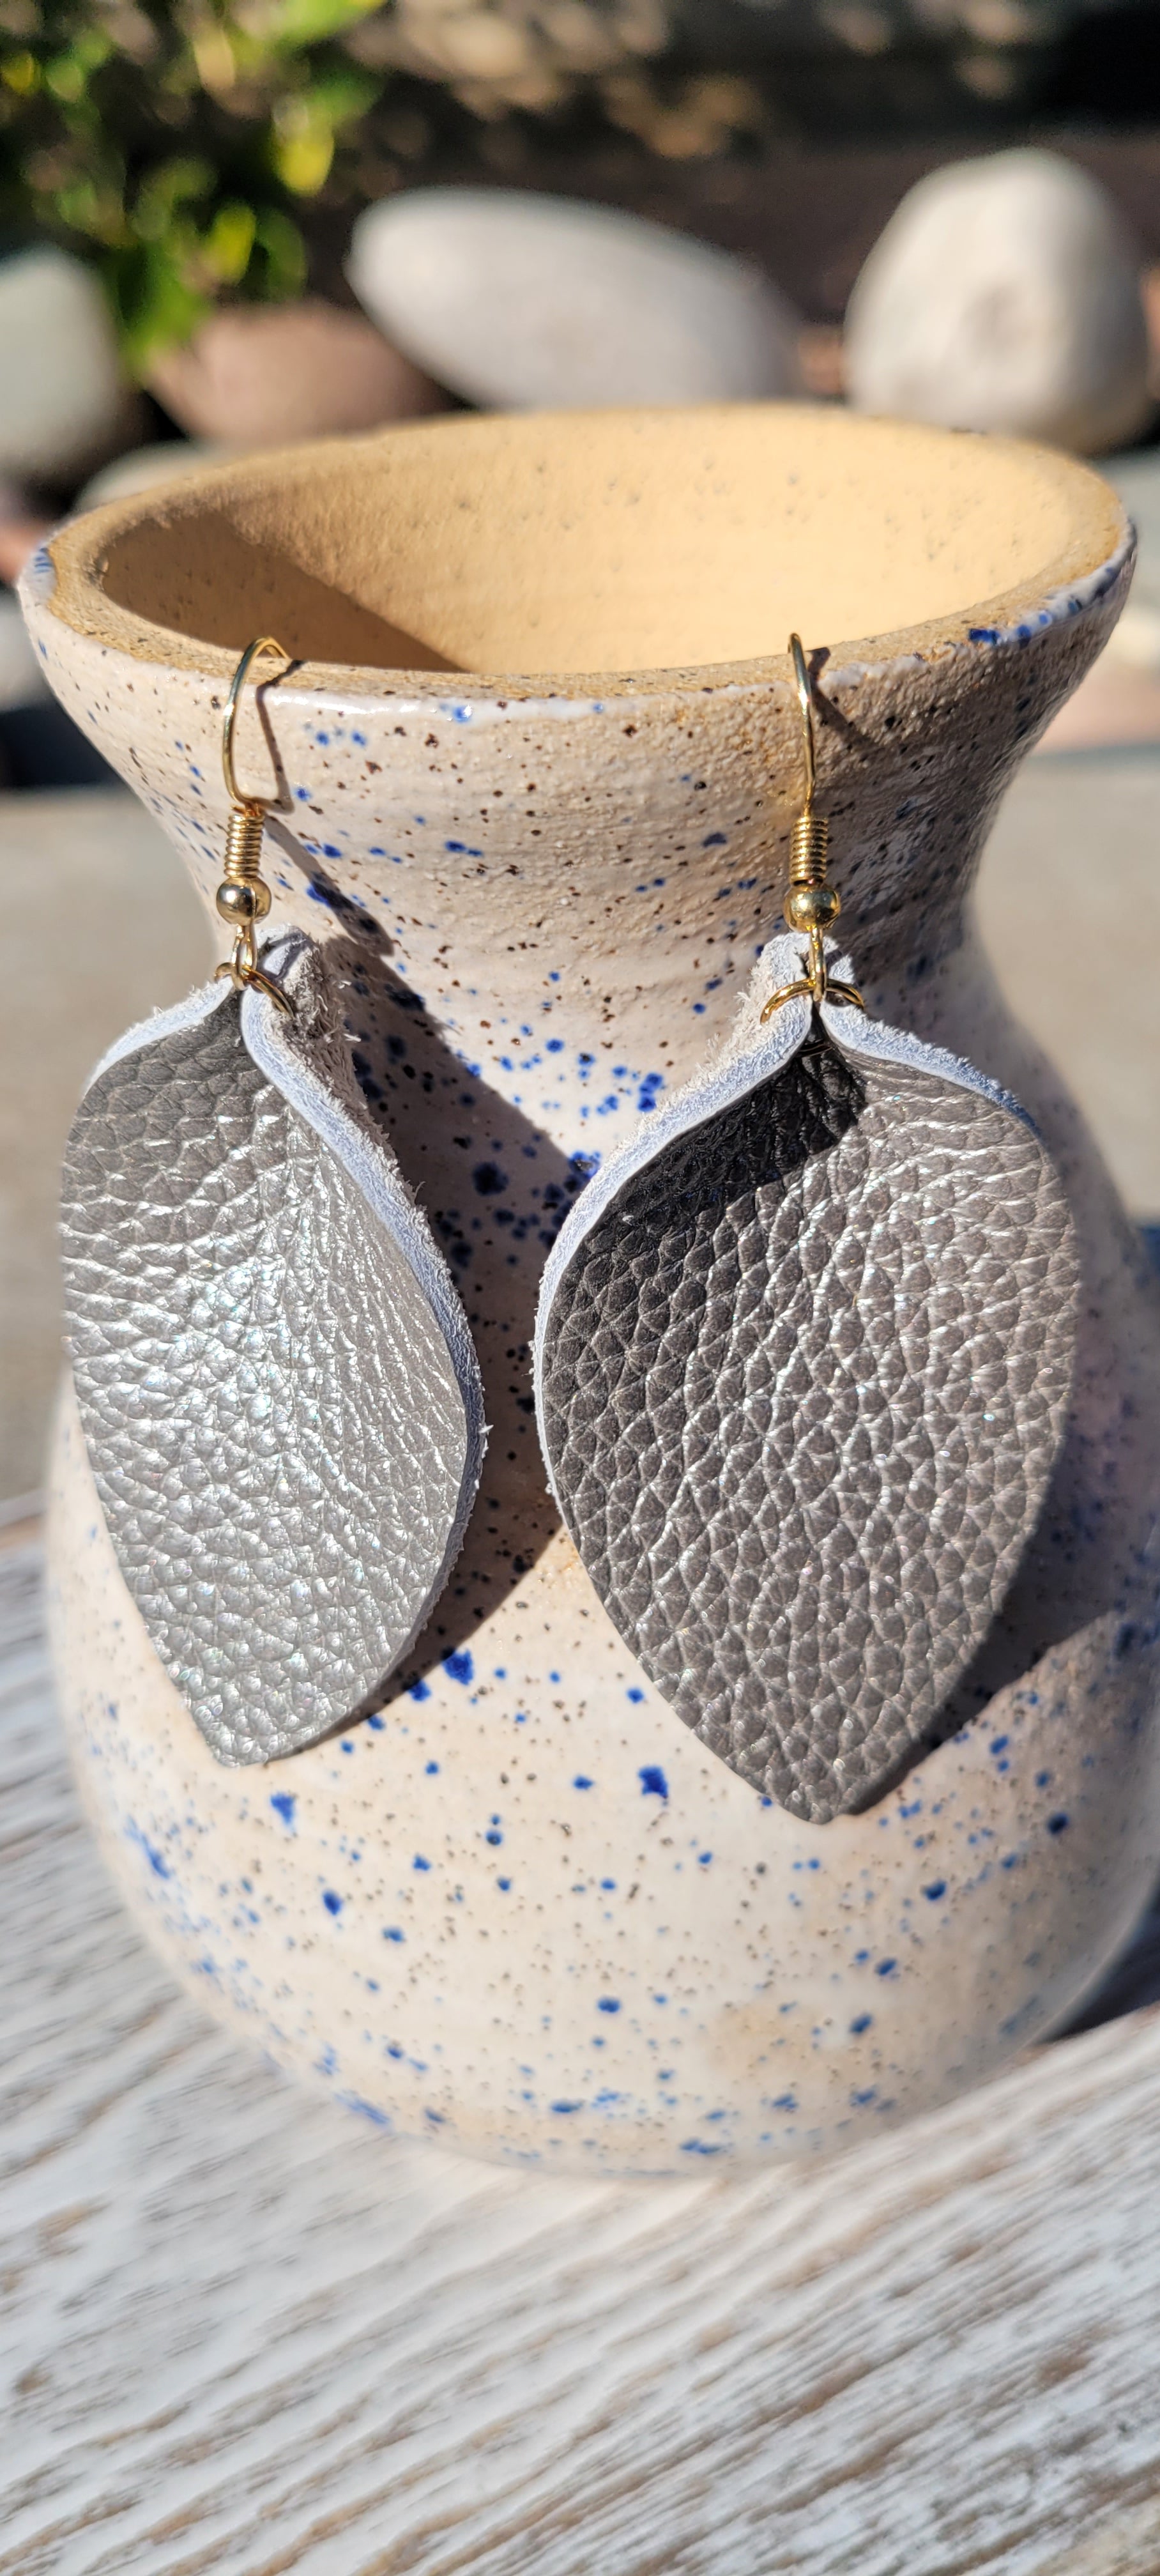 Teardrop shape Gray genuine leather Metallic silver Brushed gold fish hook dangle earrings Rubber earring back Whether you want to be on the wild side or classy this earring set it will add a fun touch to your outfit